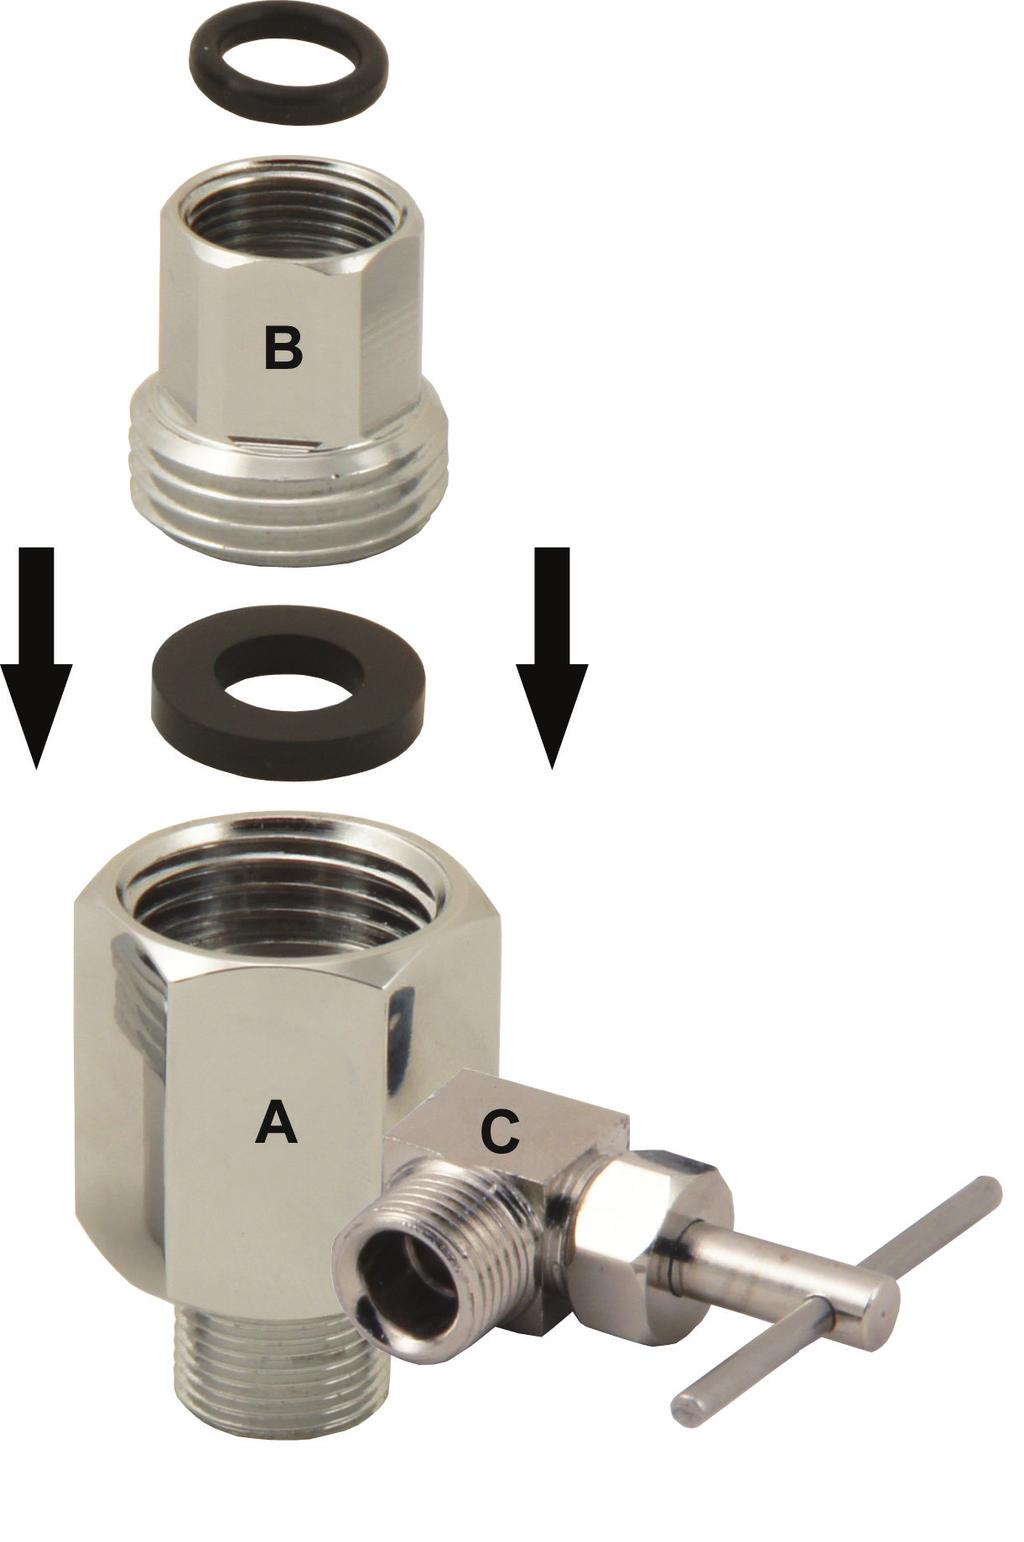 a 1/2 Male and Female water supply adapter. Fig. 5C - If your pipe has a 3/8 Connection.